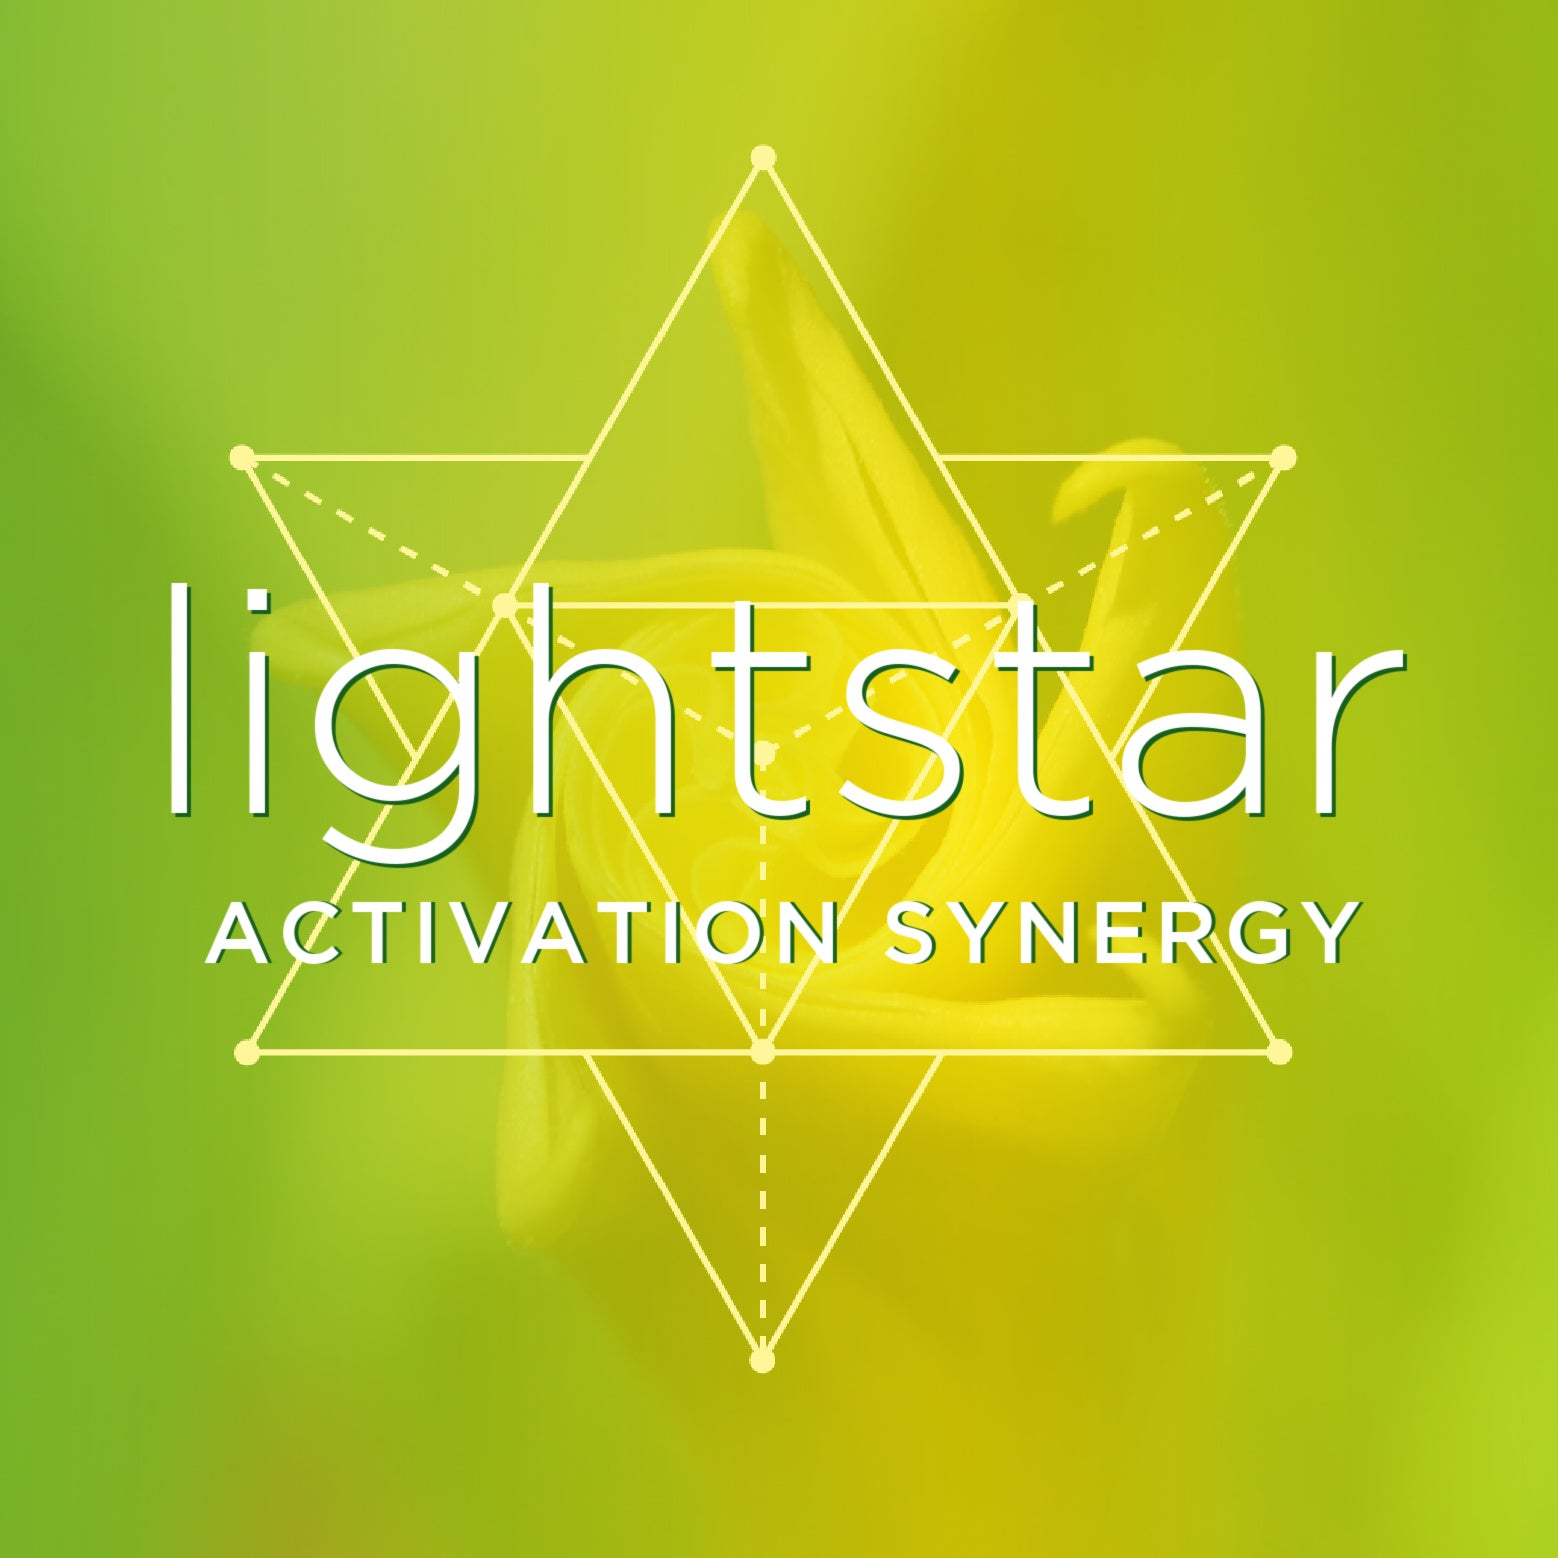 lightstar activation synergy aromatherapy